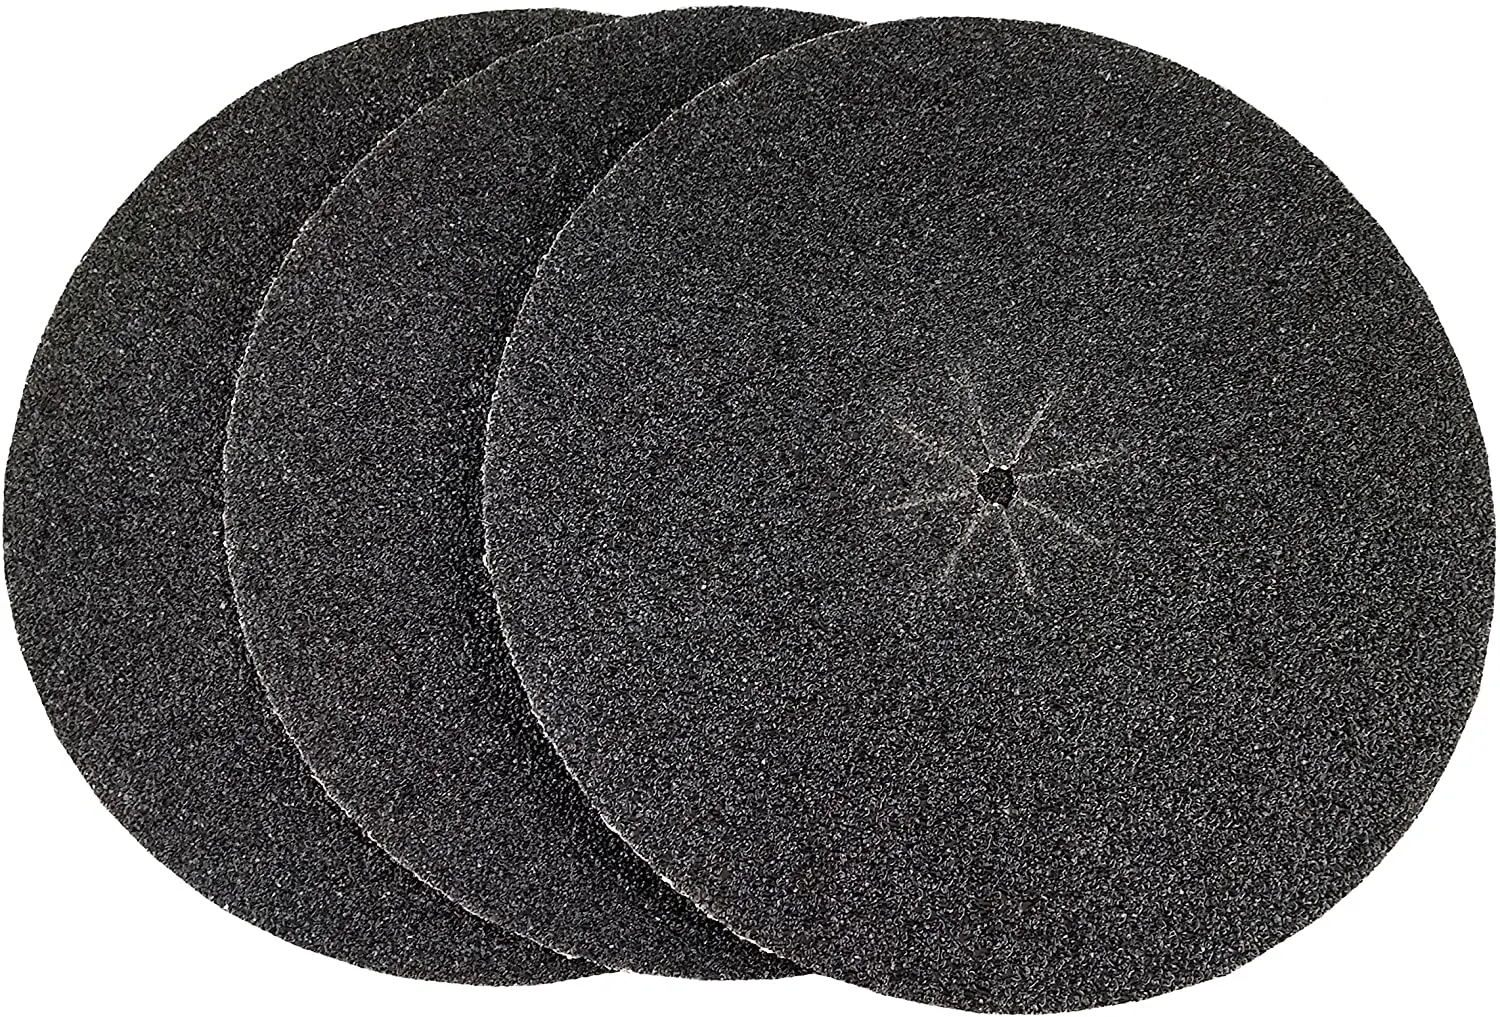 17" x 2" Silicon Carbide Slotted Edger Floor Sanding Discs 10 Pack, 36 Grit 